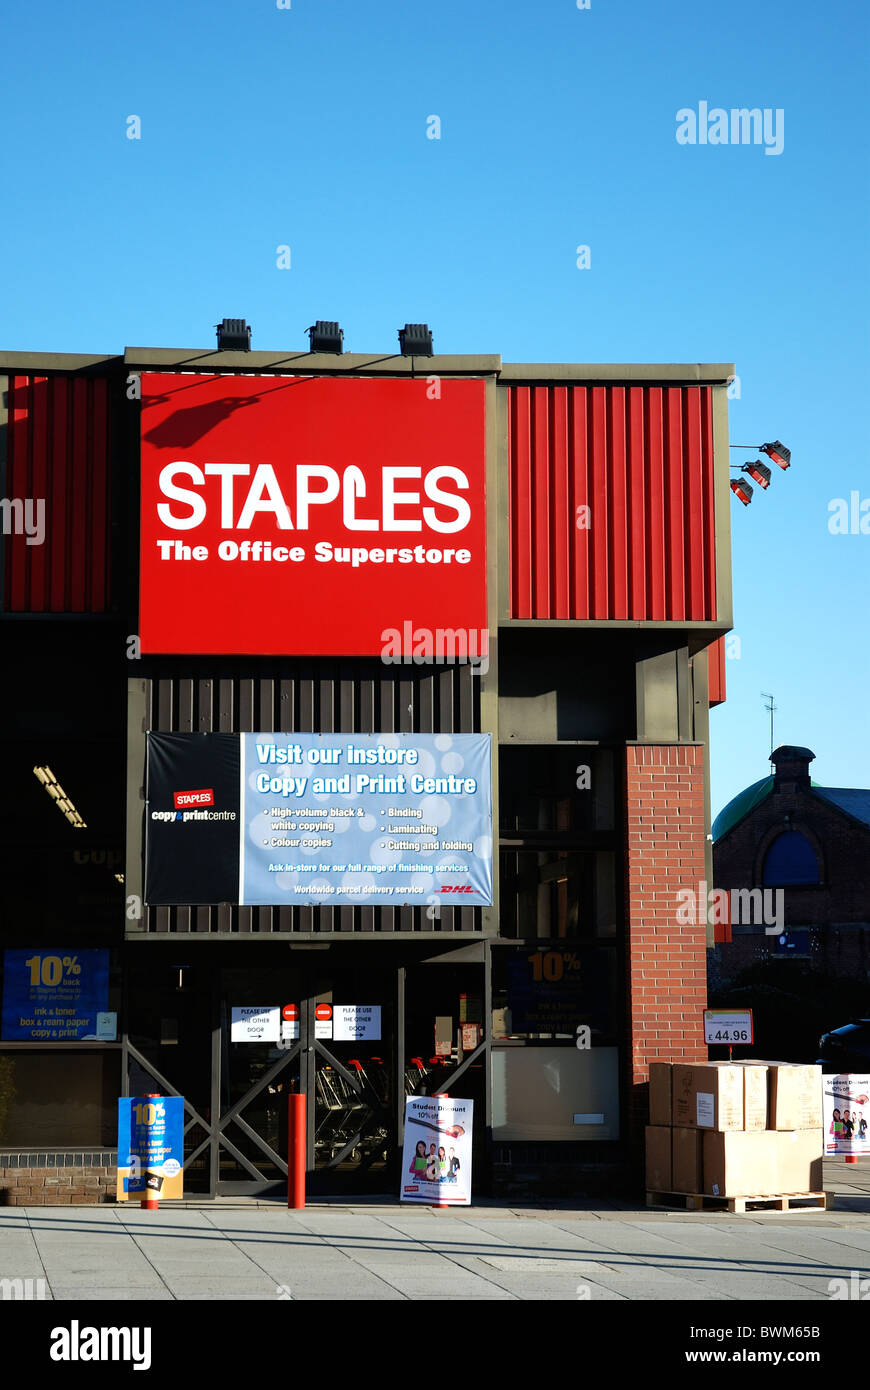 staples office stationery superstore england uk Stock Photo